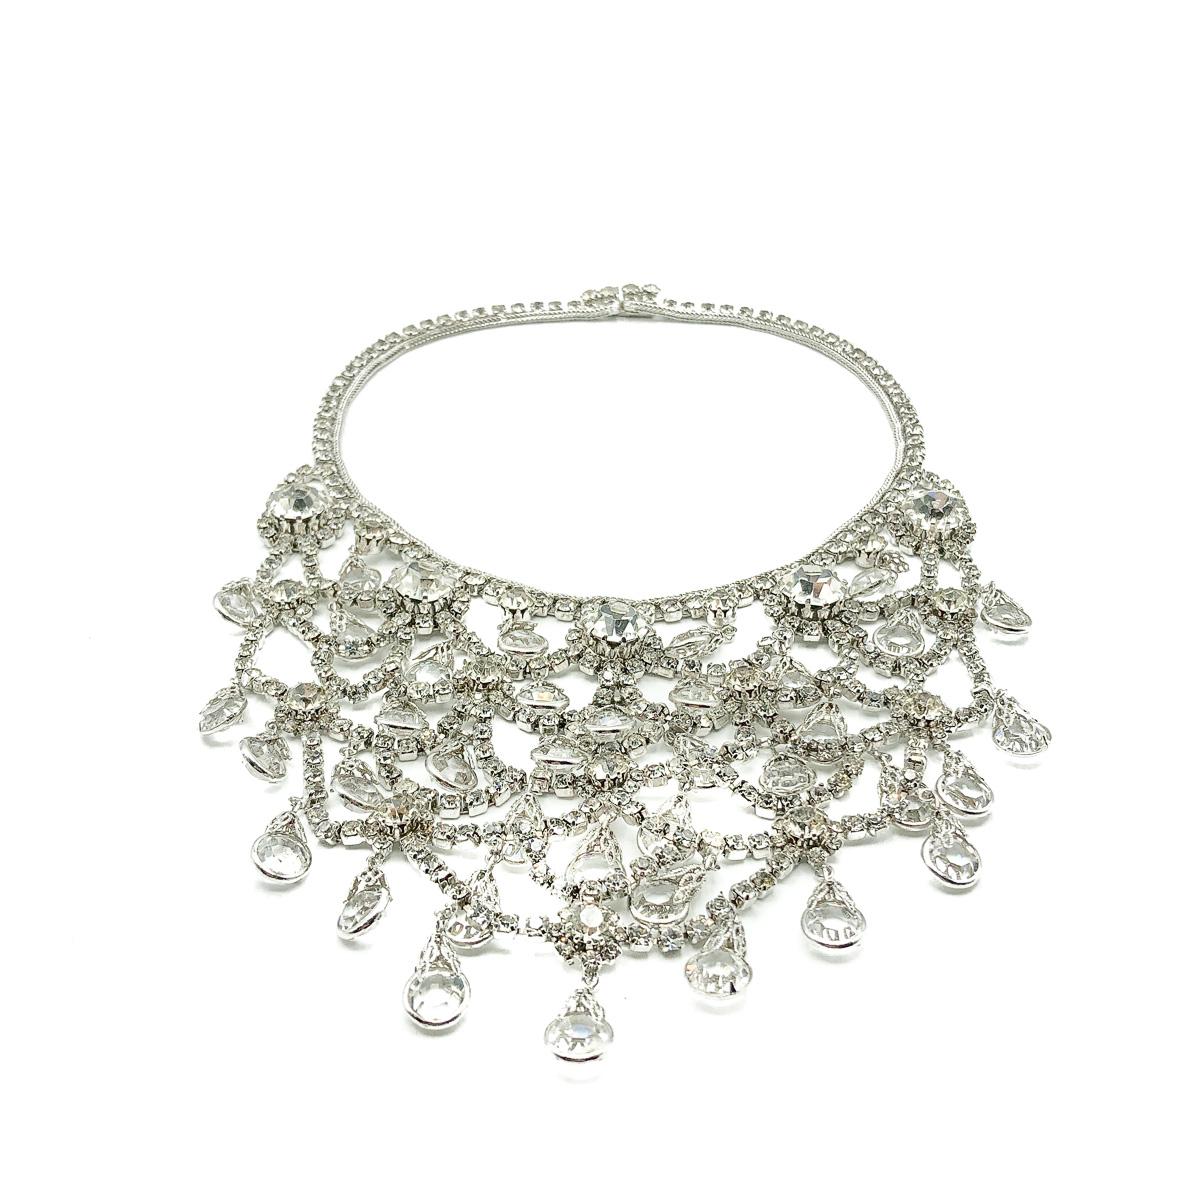 A Vintage Crystal Festoon Necklace from the 1950s. An exquisite and rare find. Featuring rows and rows of individually claw set crystals festooned to huge effect from an end to end rhinestone encrusted collar. Small crystal droplets set in filigree